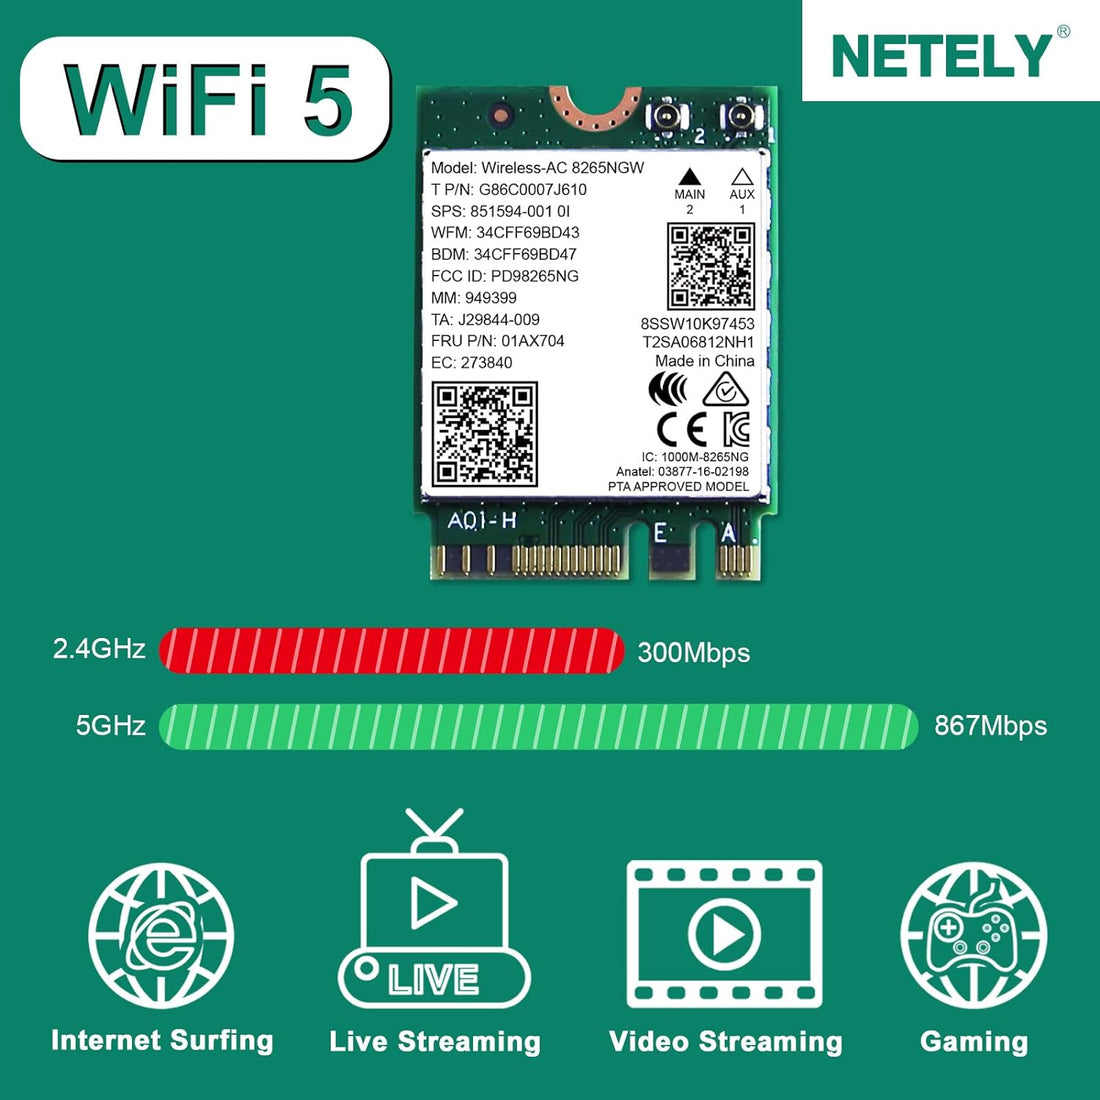 NETELY Wireless-AC 8265NGW Wireless-AC 1200Mbps NGFF M2 Interface WiFi Adapter with Bluetooth 4.2 for Laptop PCs, 2.4GHz 300Mbps & 5GHz 867Mbps Wireless Network Card (Wireless-AC 8265NGW)